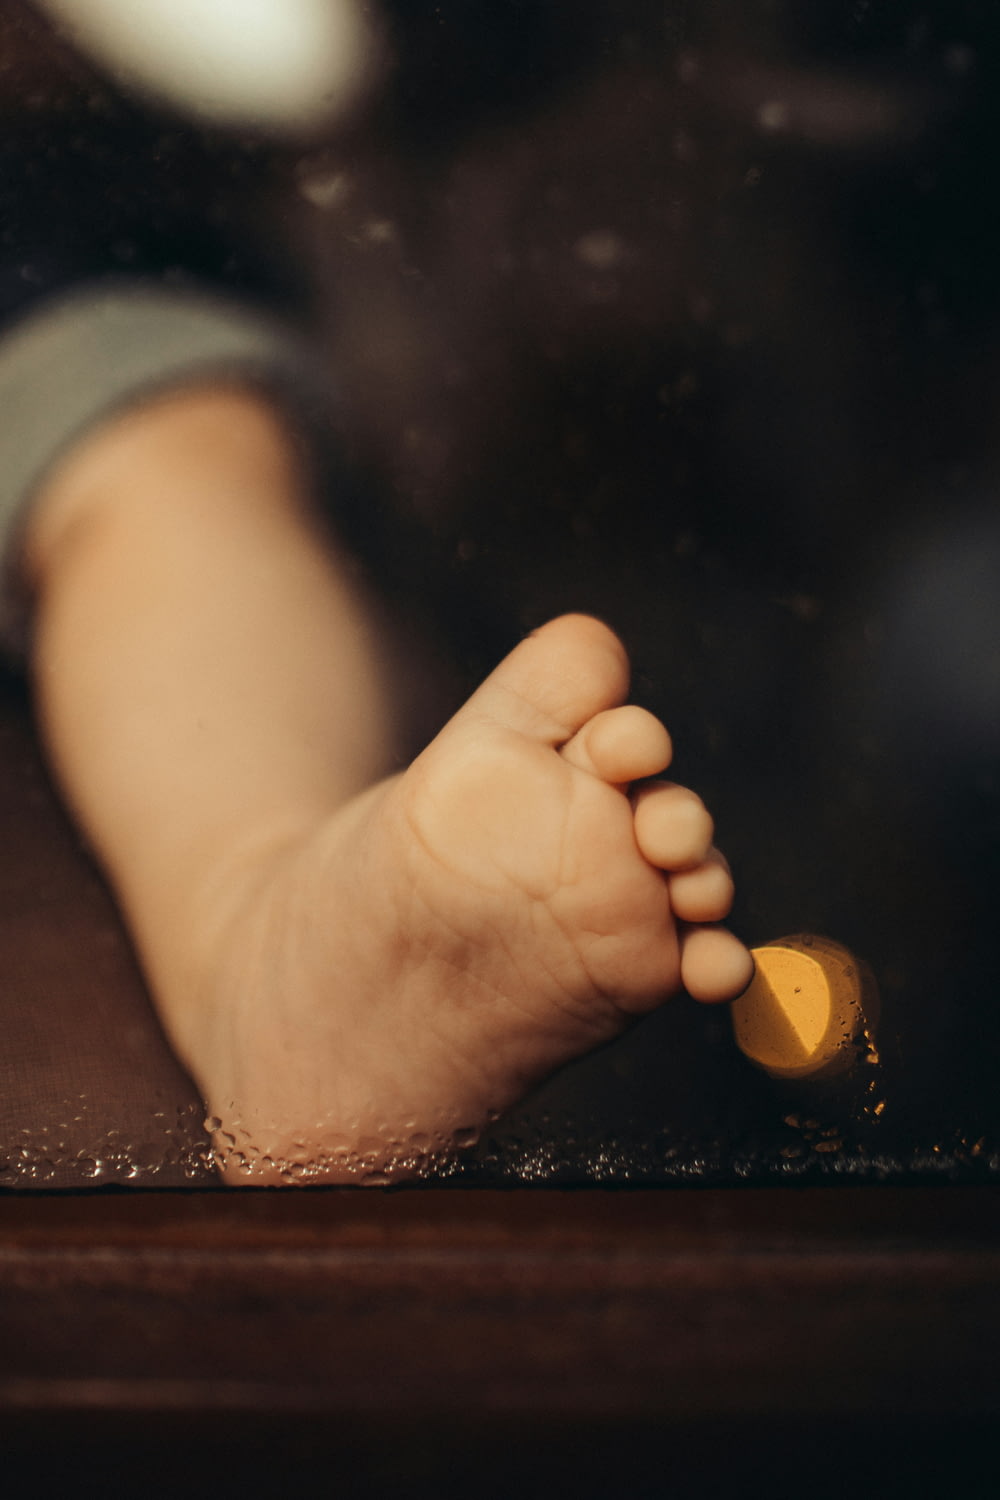 a close up of a baby's foot and hand